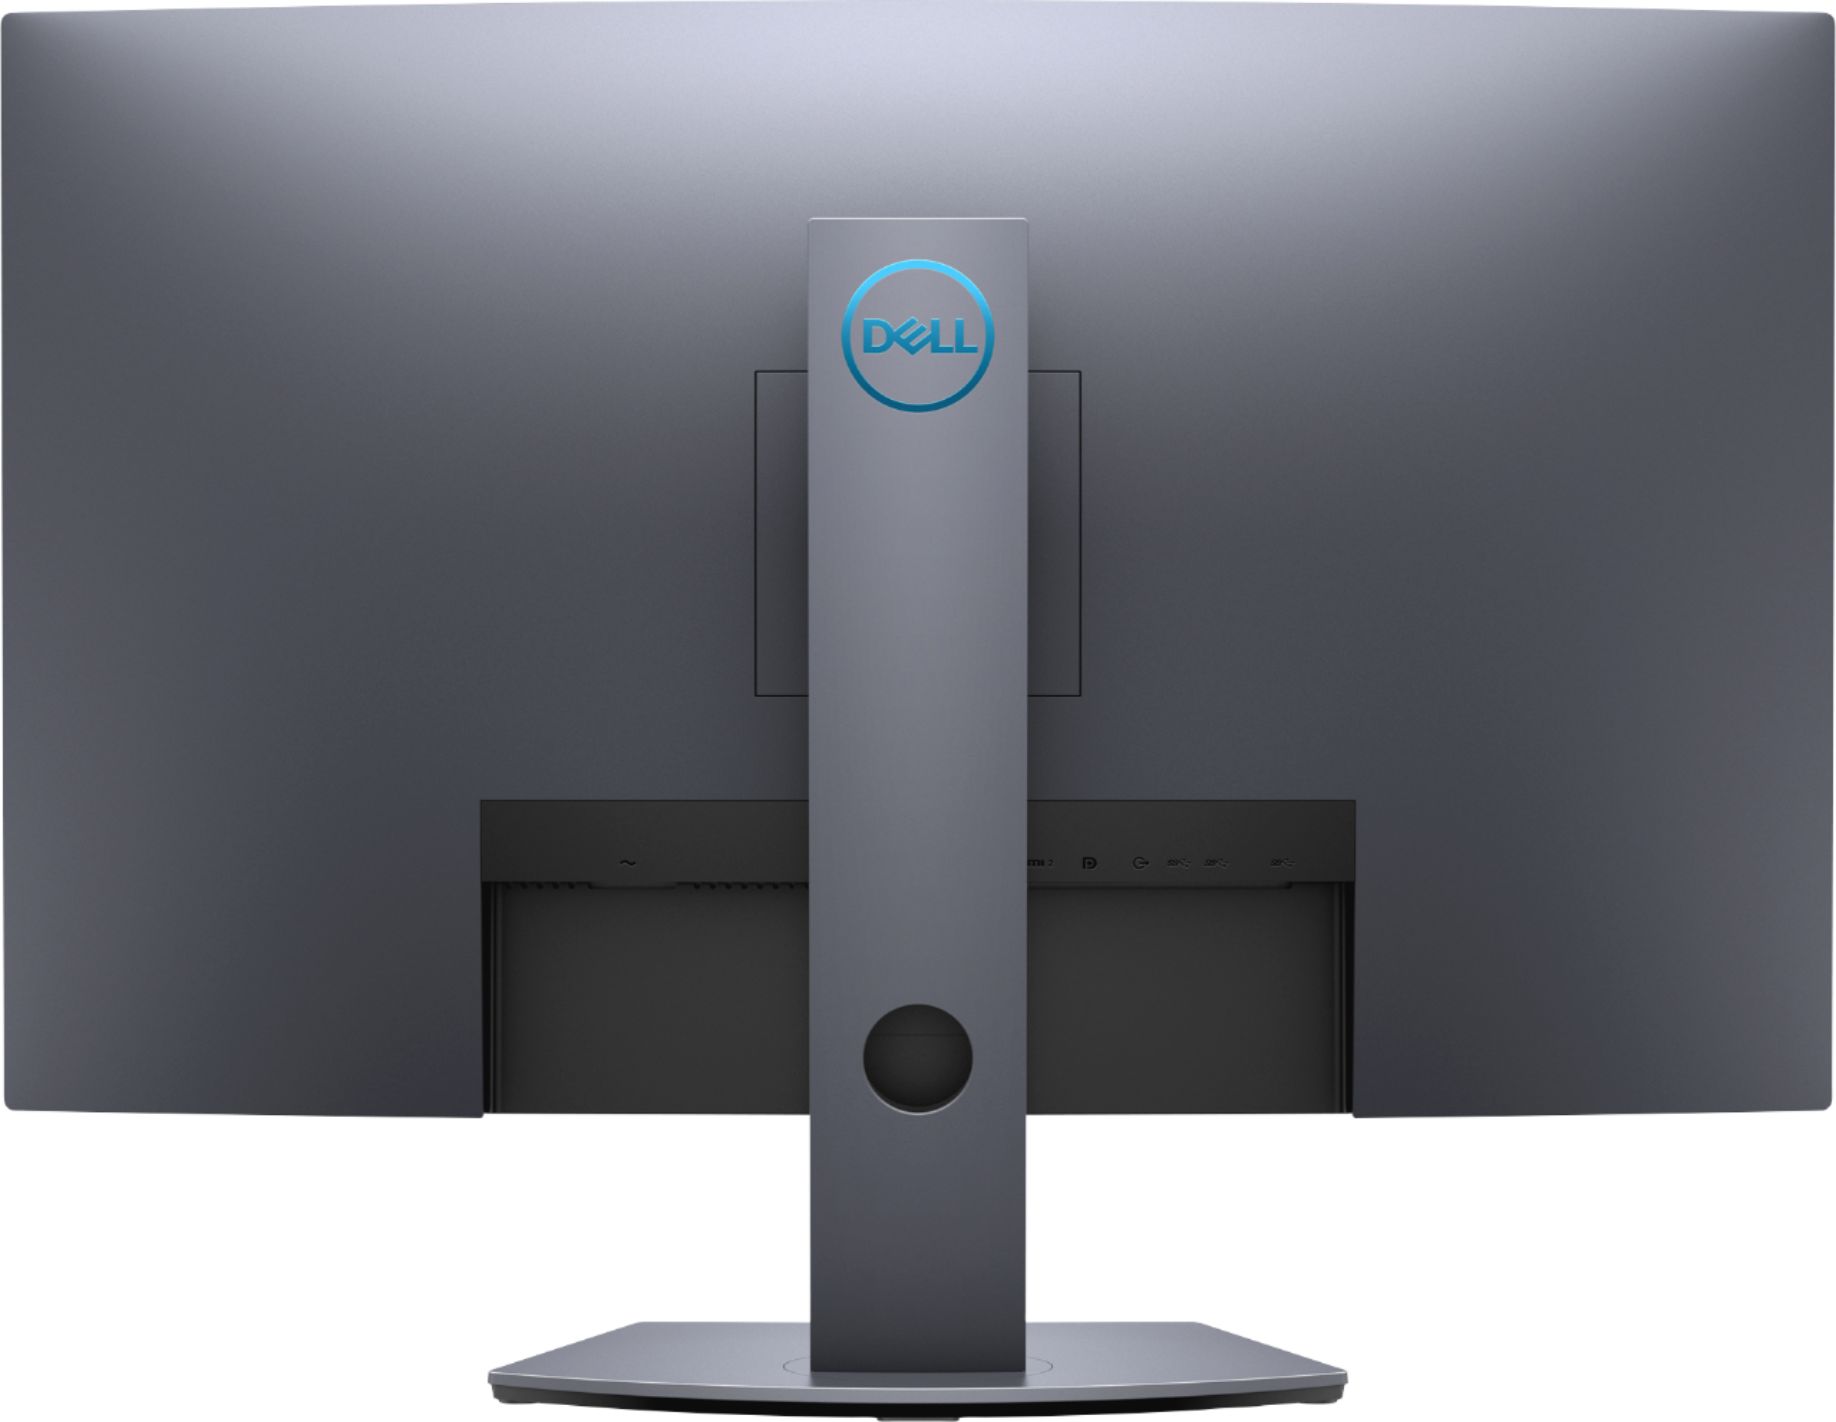 Back View: Dell - S3220DGF 32" LED Curved QHD FreeSync Monitor with HDR (DisplayPort, HDMI, USB) - Ascent Gray